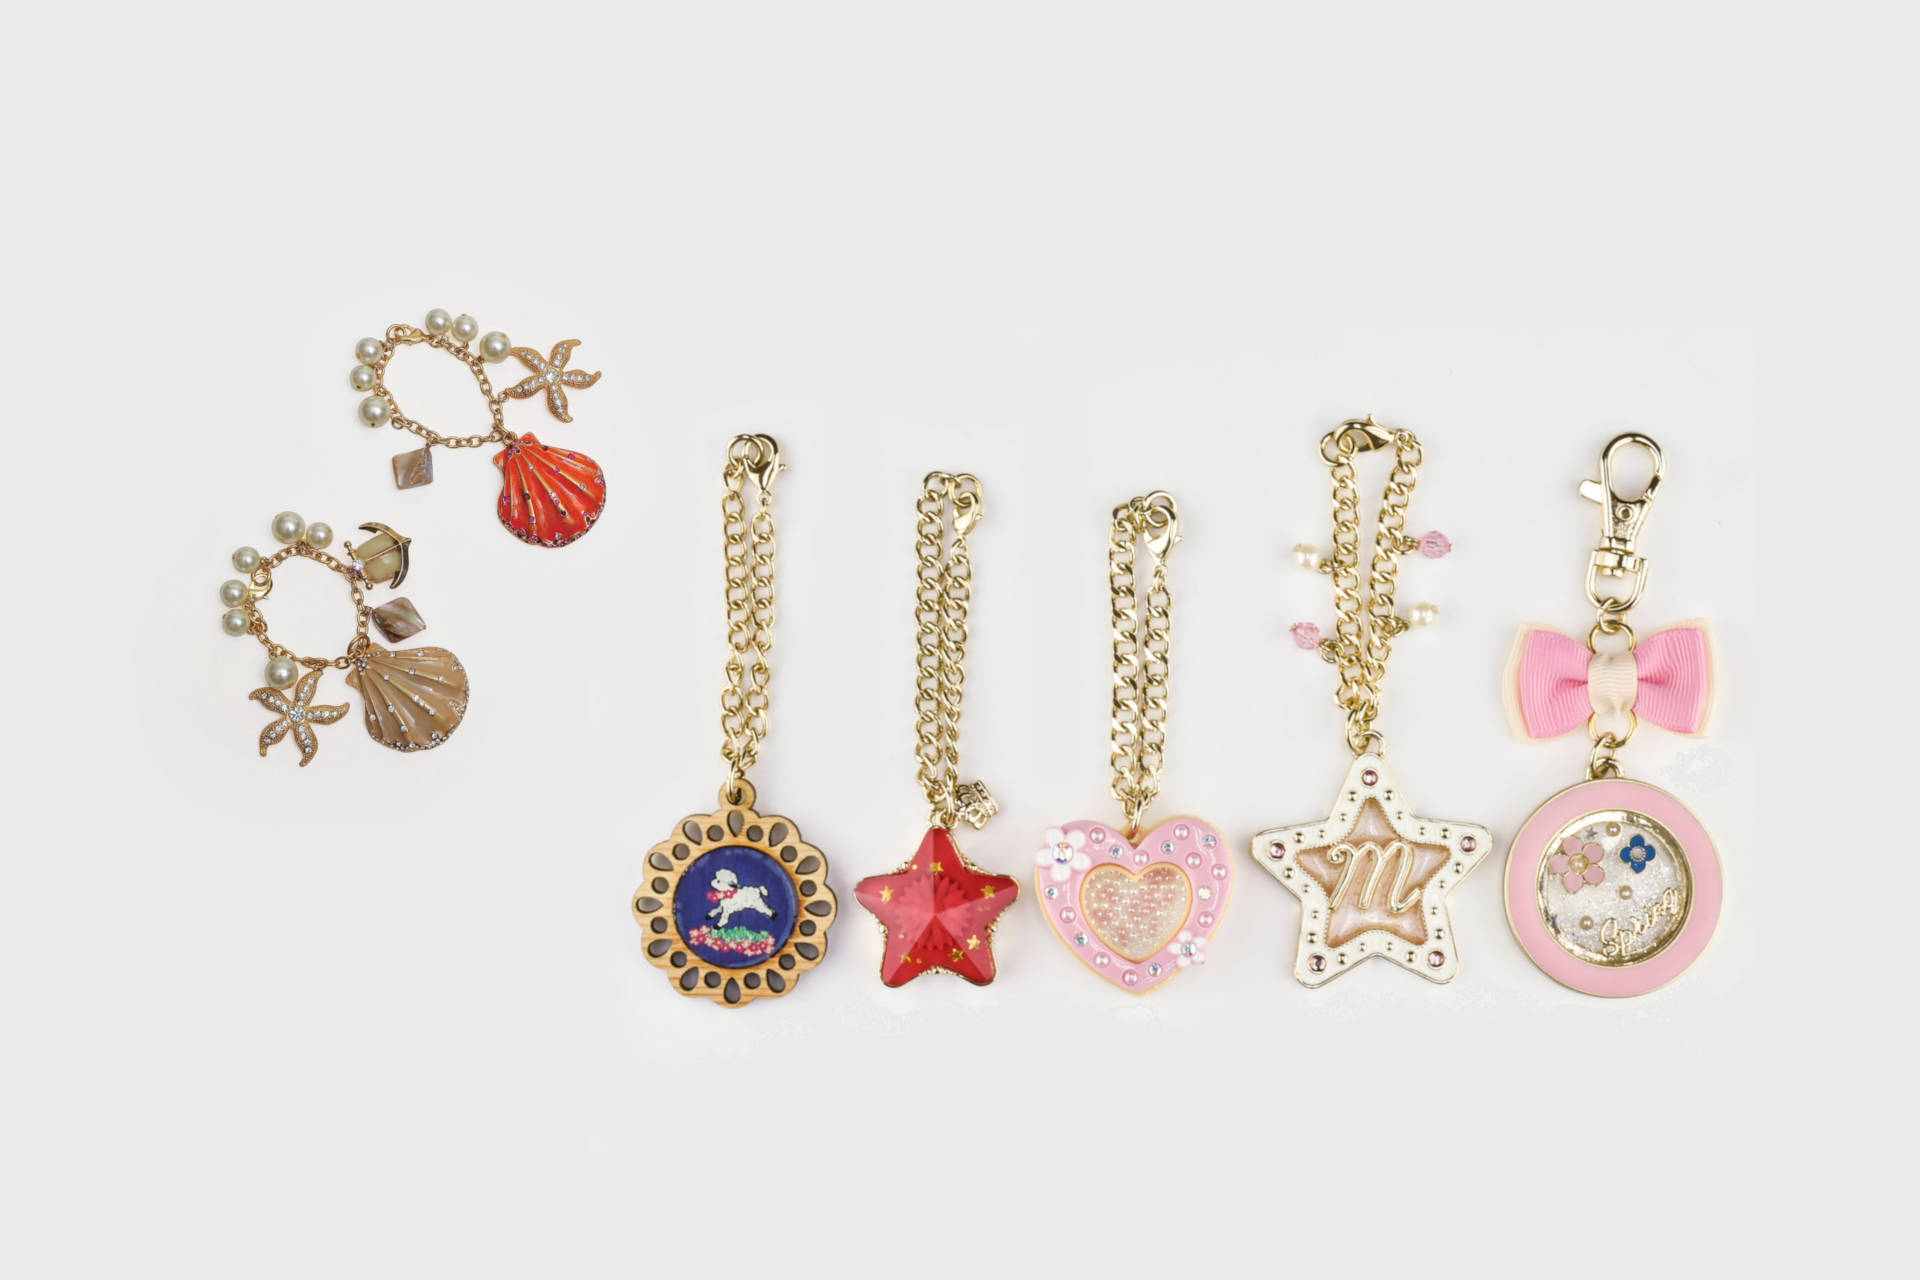 Accessory OEM manufacturing examples (bag charms)